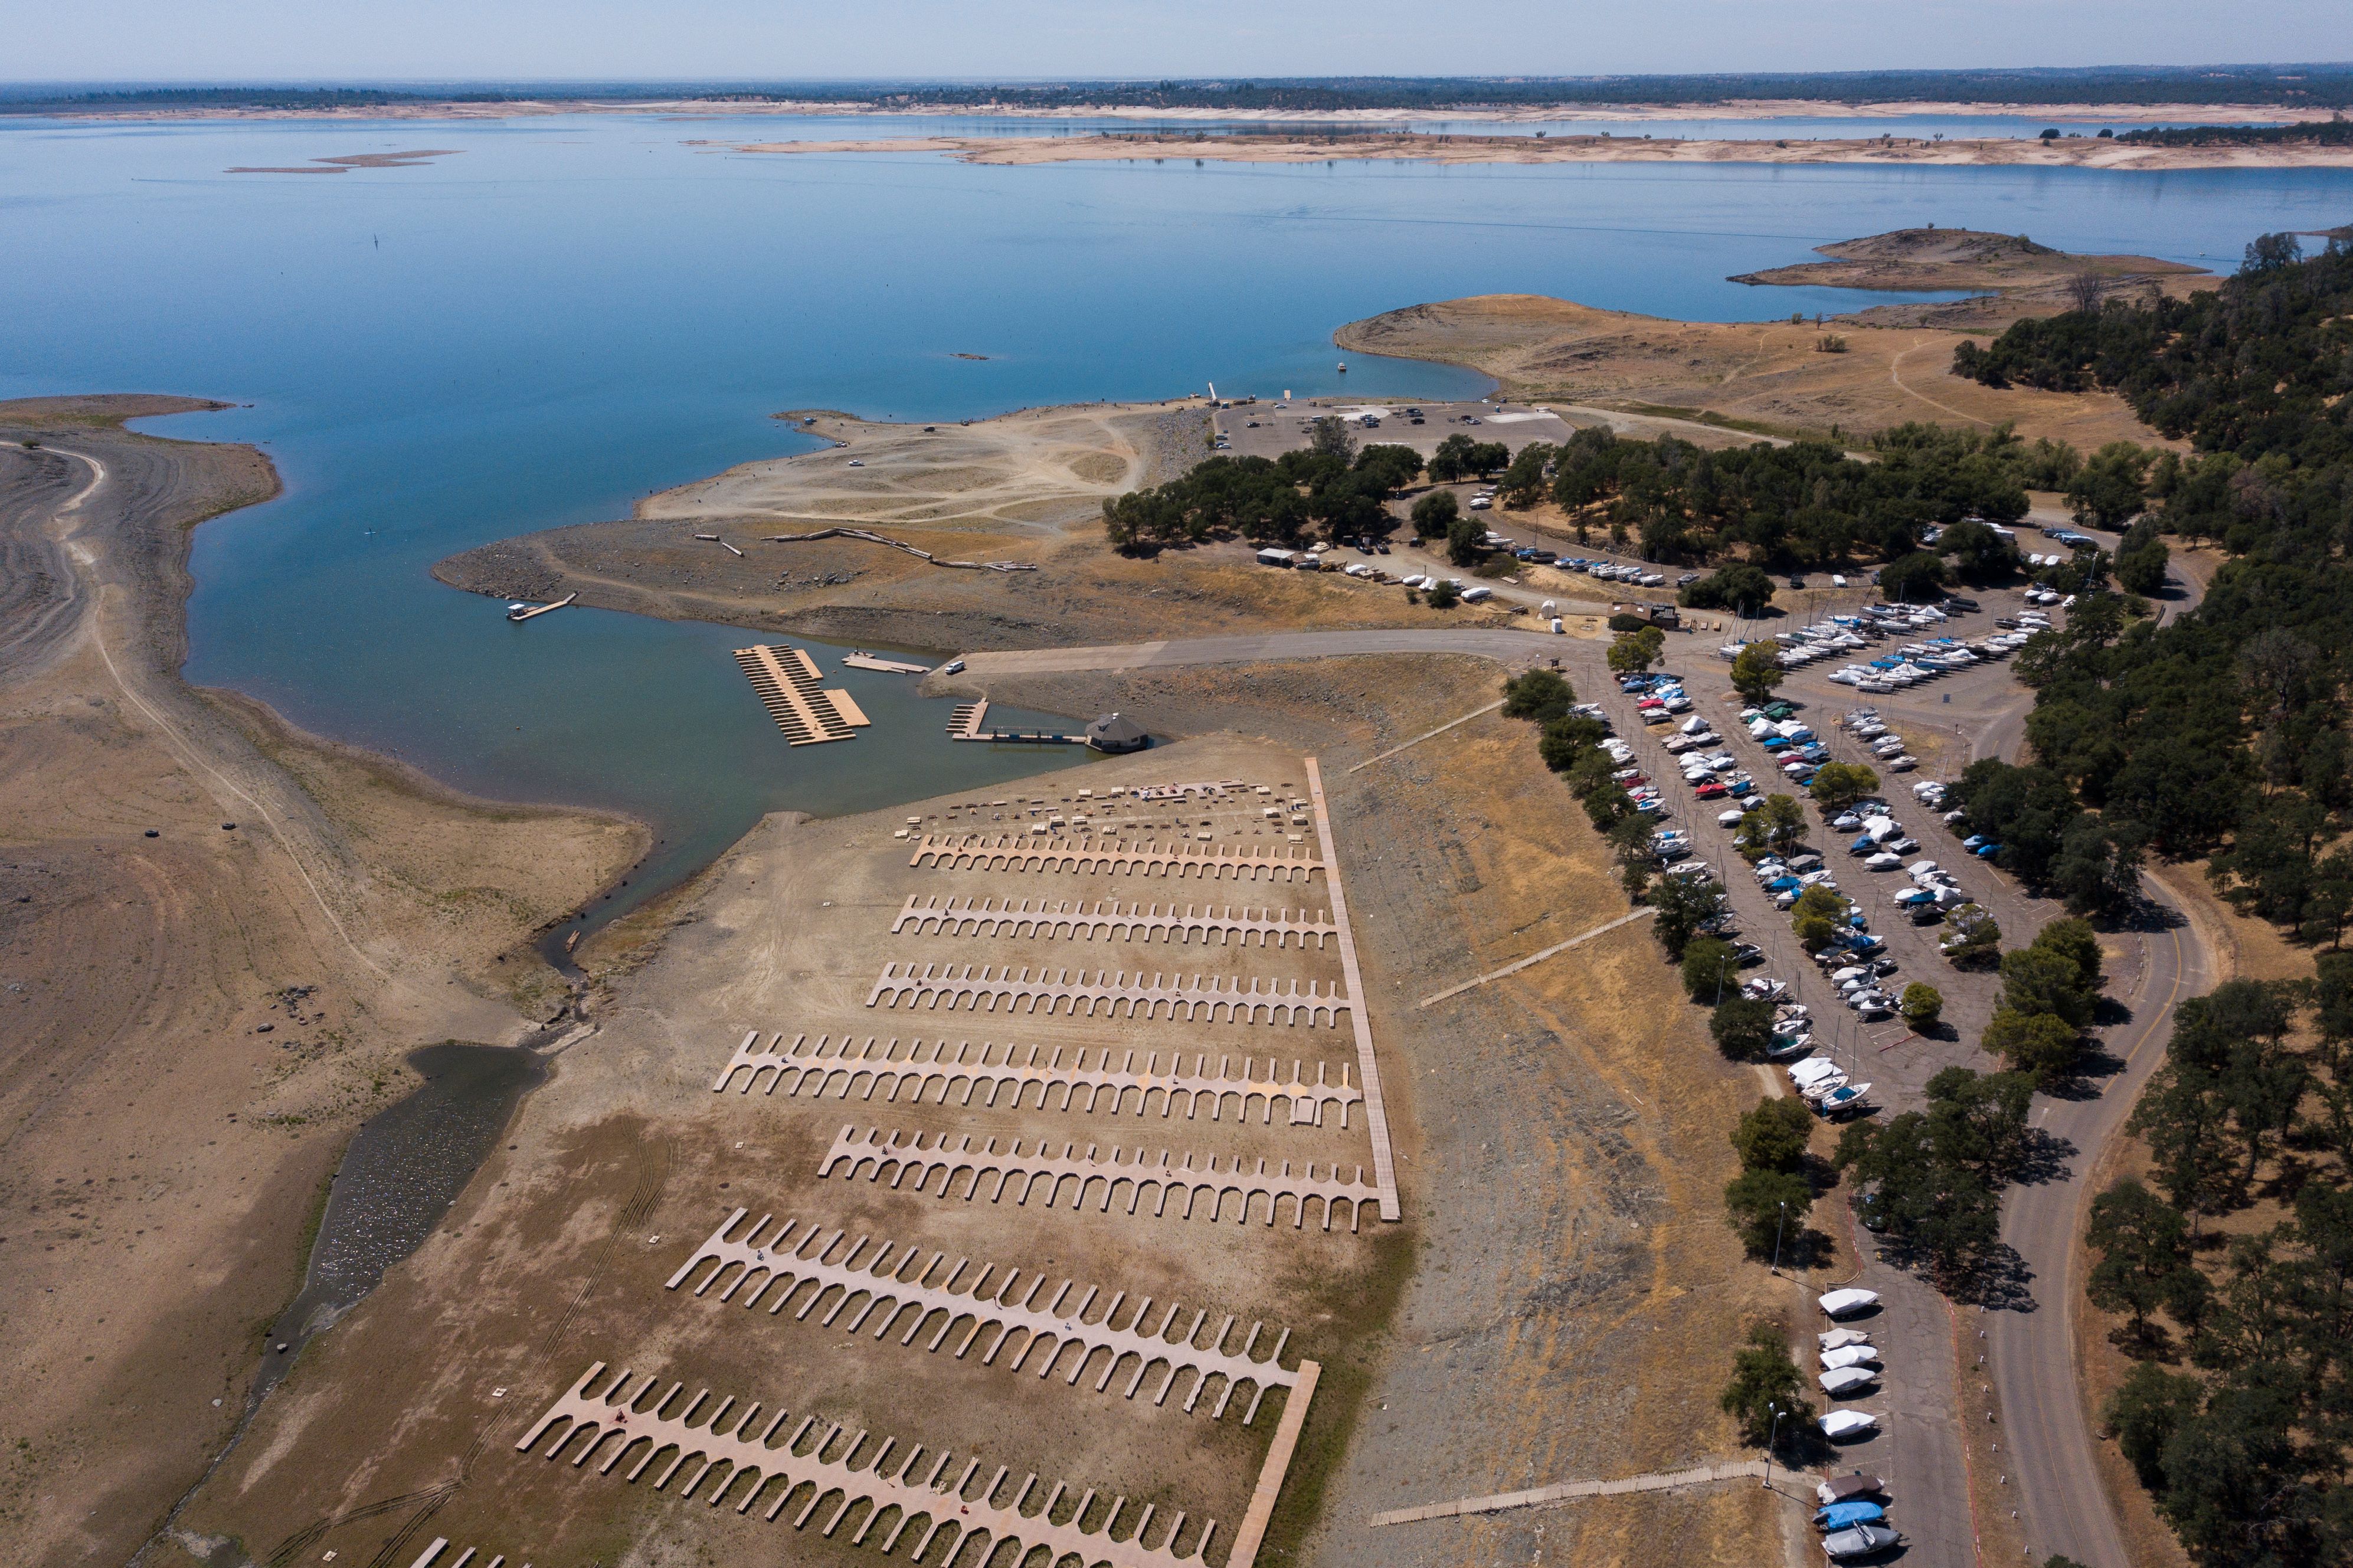 An aerial image shows boats stored in a parking lot after the Folsom Lake Marina closed due to dry lake bed conditions during the California drought emergency on May 27, 2021 in El Dorado Hills, California. A plane wreckage found at the bottom of the lake could solve a decades-old mystery.